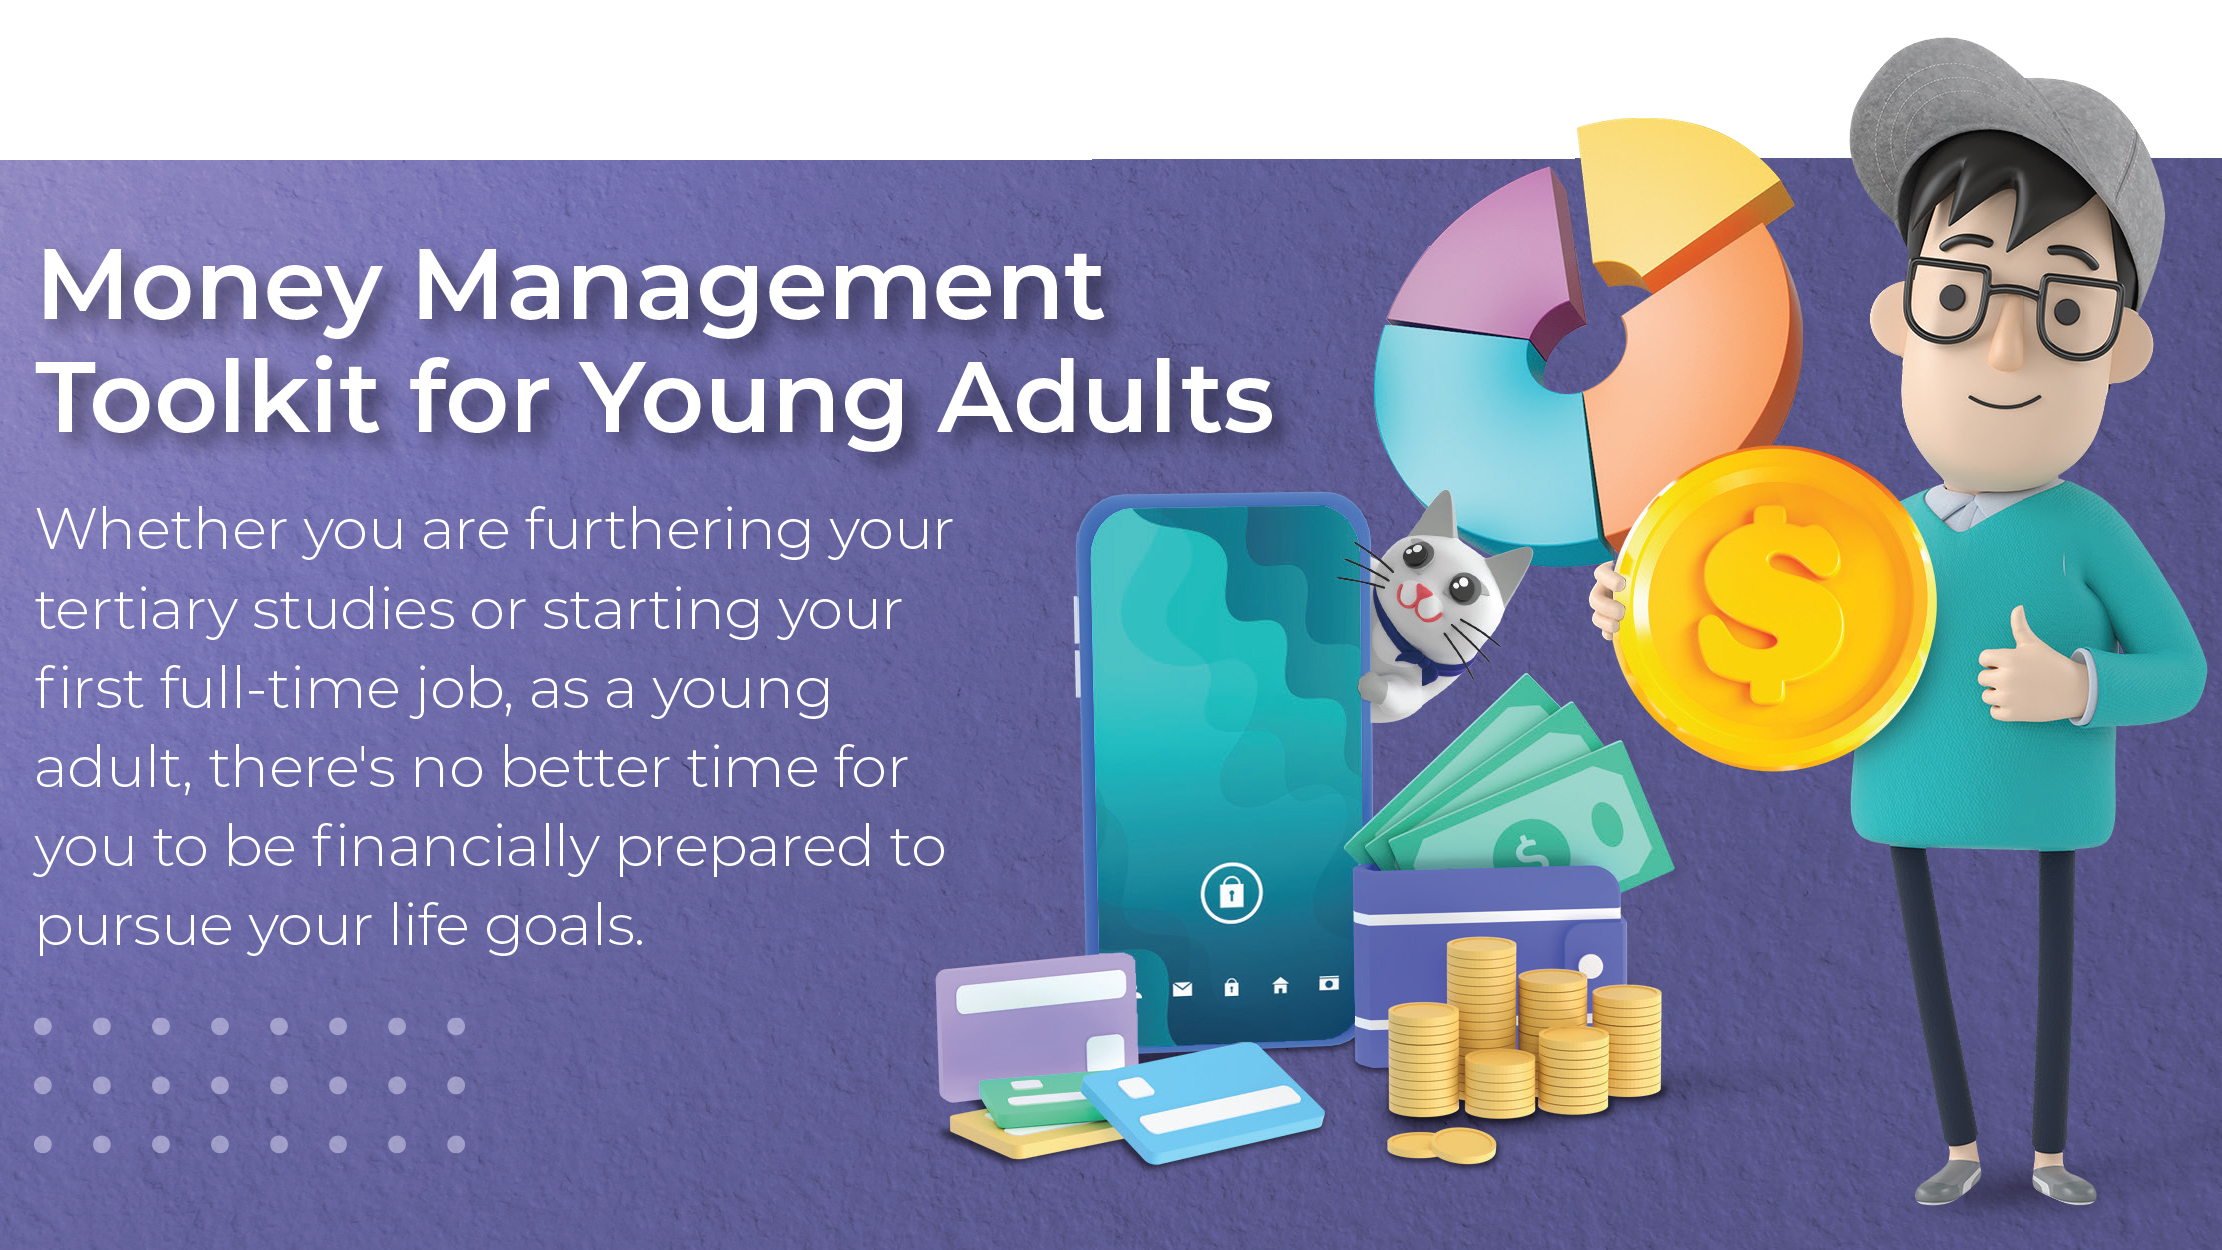 Money Management Toolkit for Young Adults